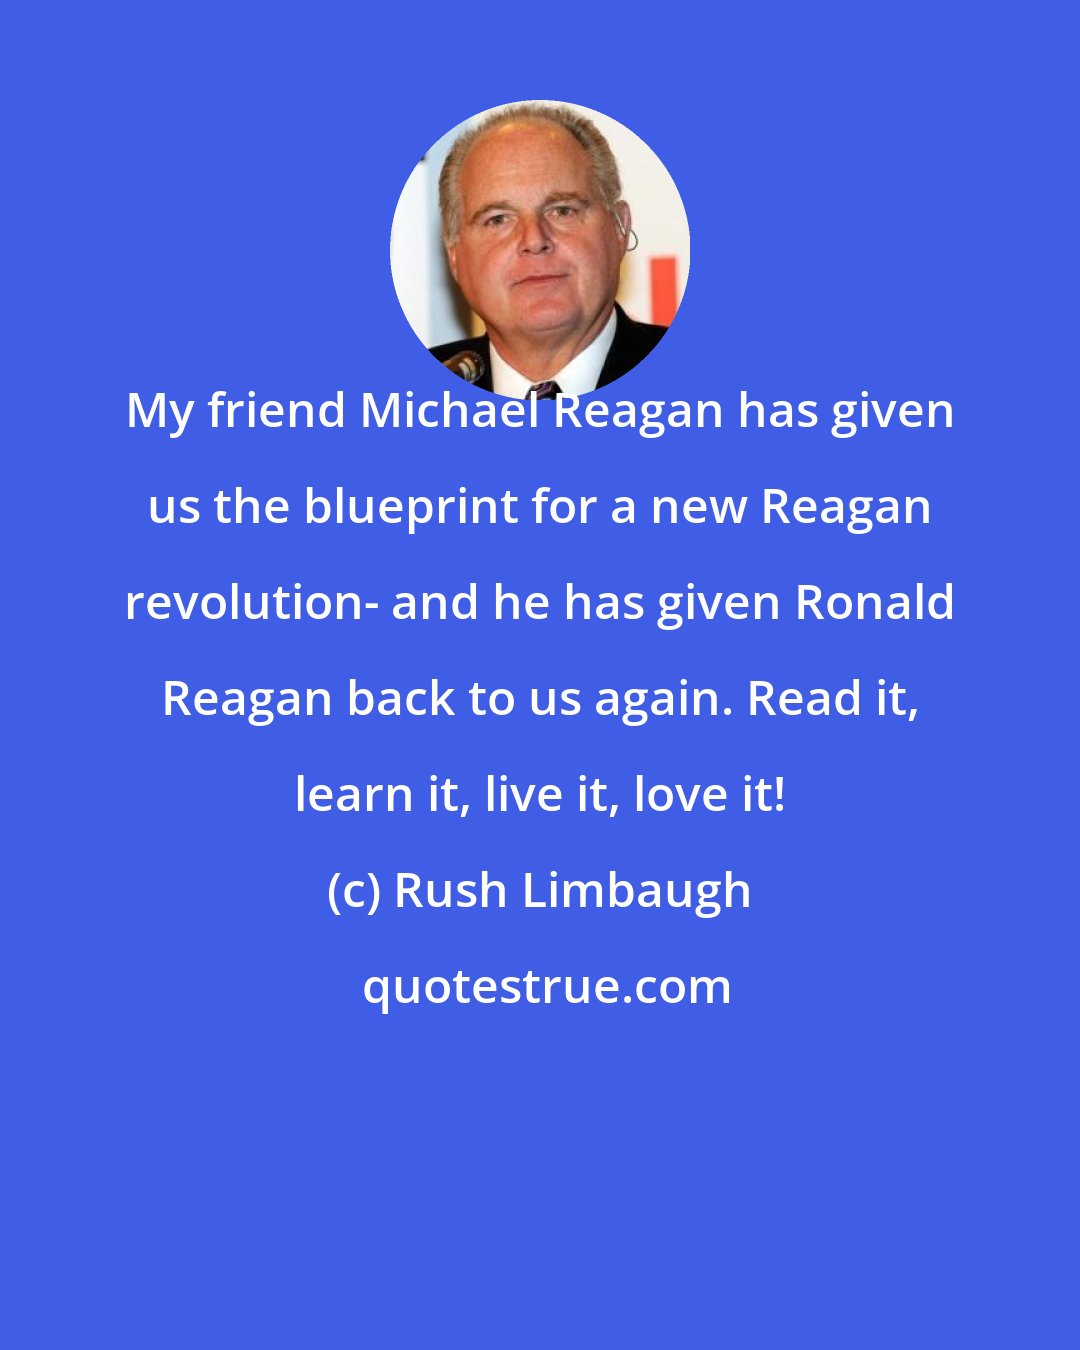 Rush Limbaugh: My friend Michael Reagan has given us the blueprint for a new Reagan revolution- and he has given Ronald Reagan back to us again. Read it, learn it, live it, love it!